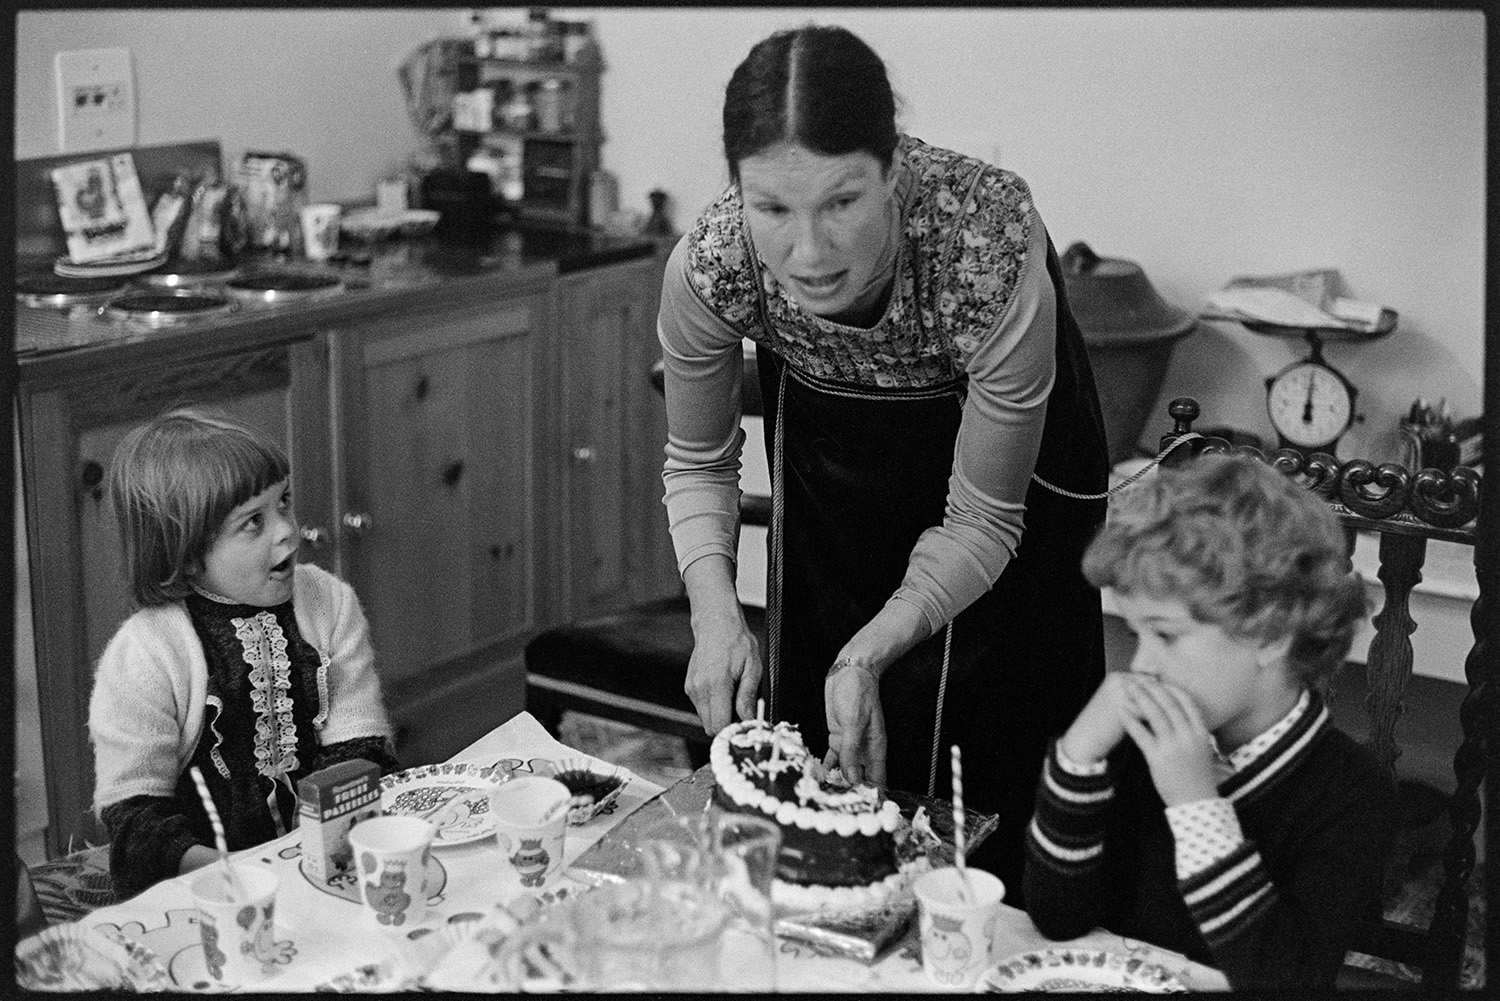 Birthday tea, mother cutting cake handing it round. 
[Hilary Hill cutting the cake at her child's 6th birthday party at Marwood House. She is handing the cake round to the other children.]